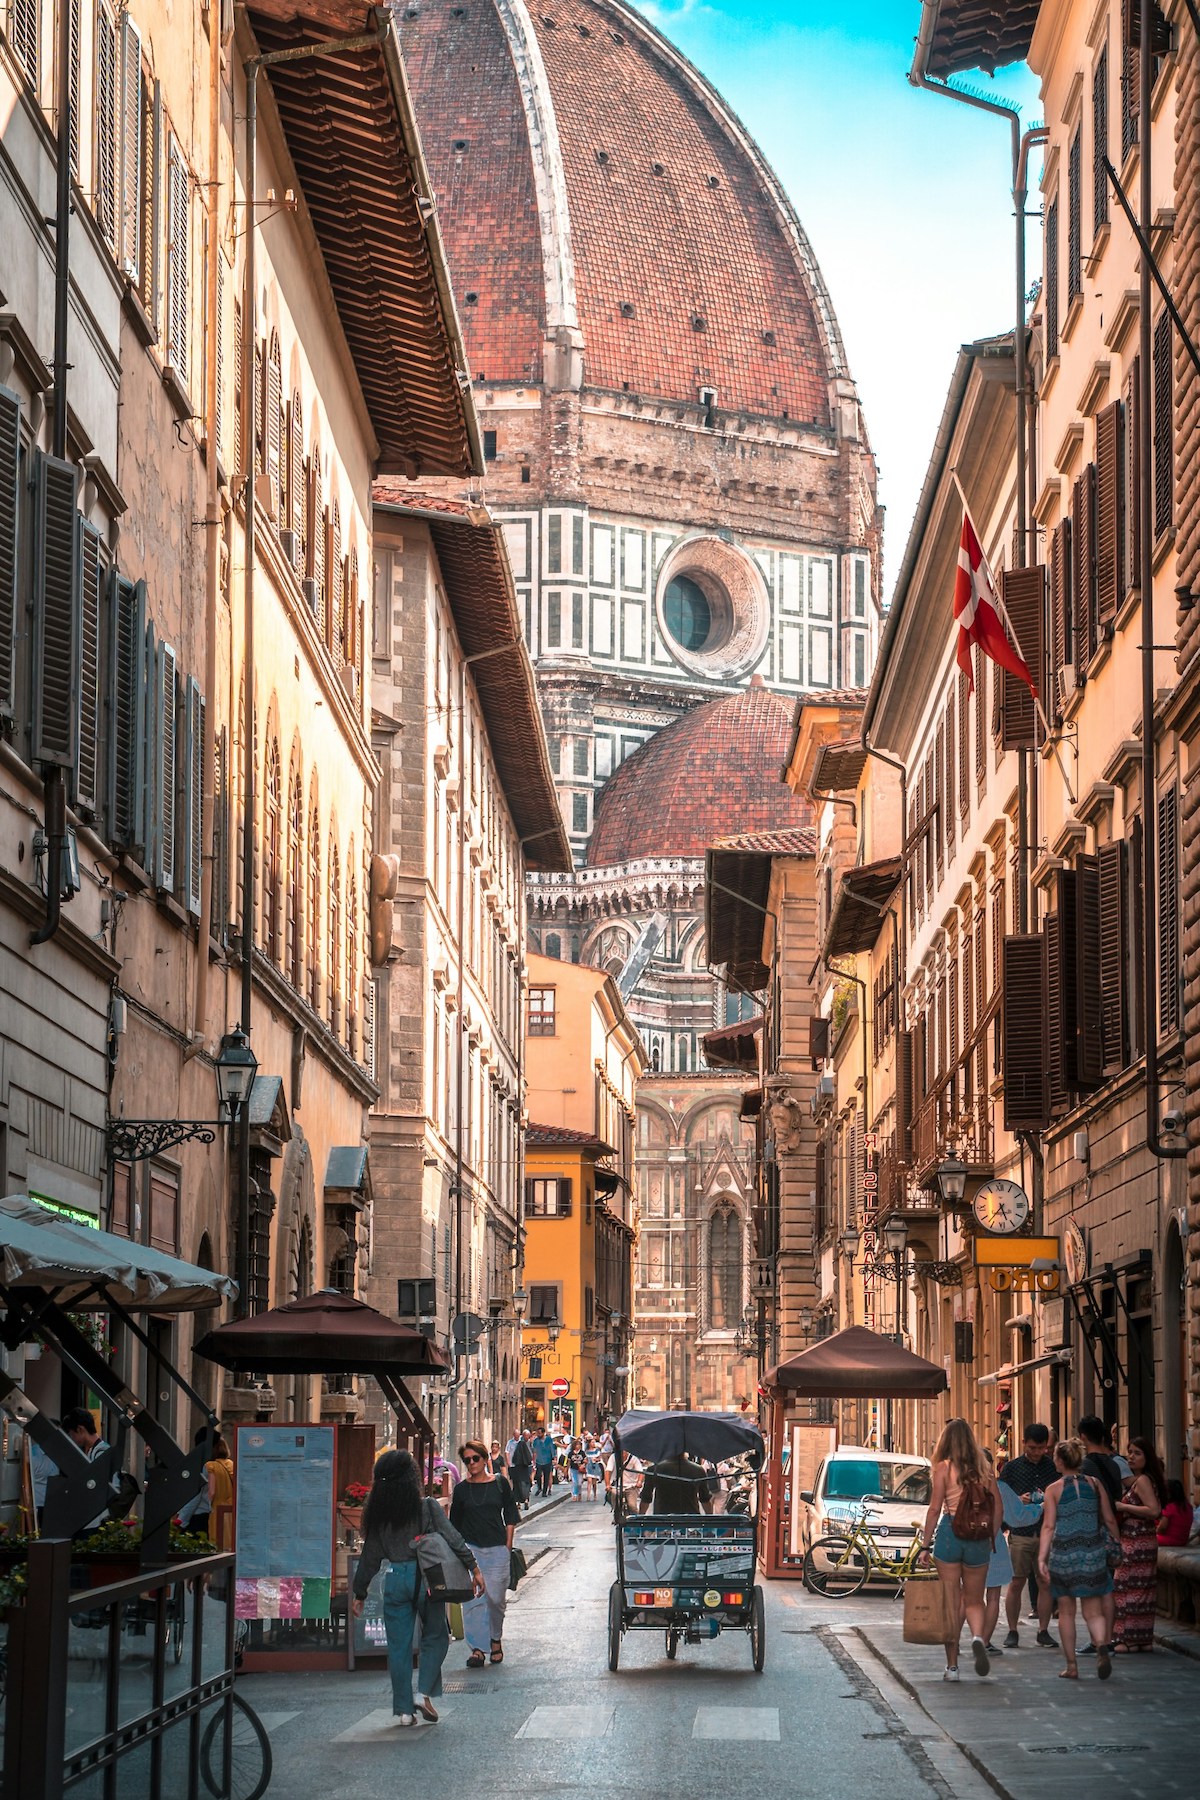 Views of Santa Maria del Fiore from a street in Florence filled with tastes and traditions